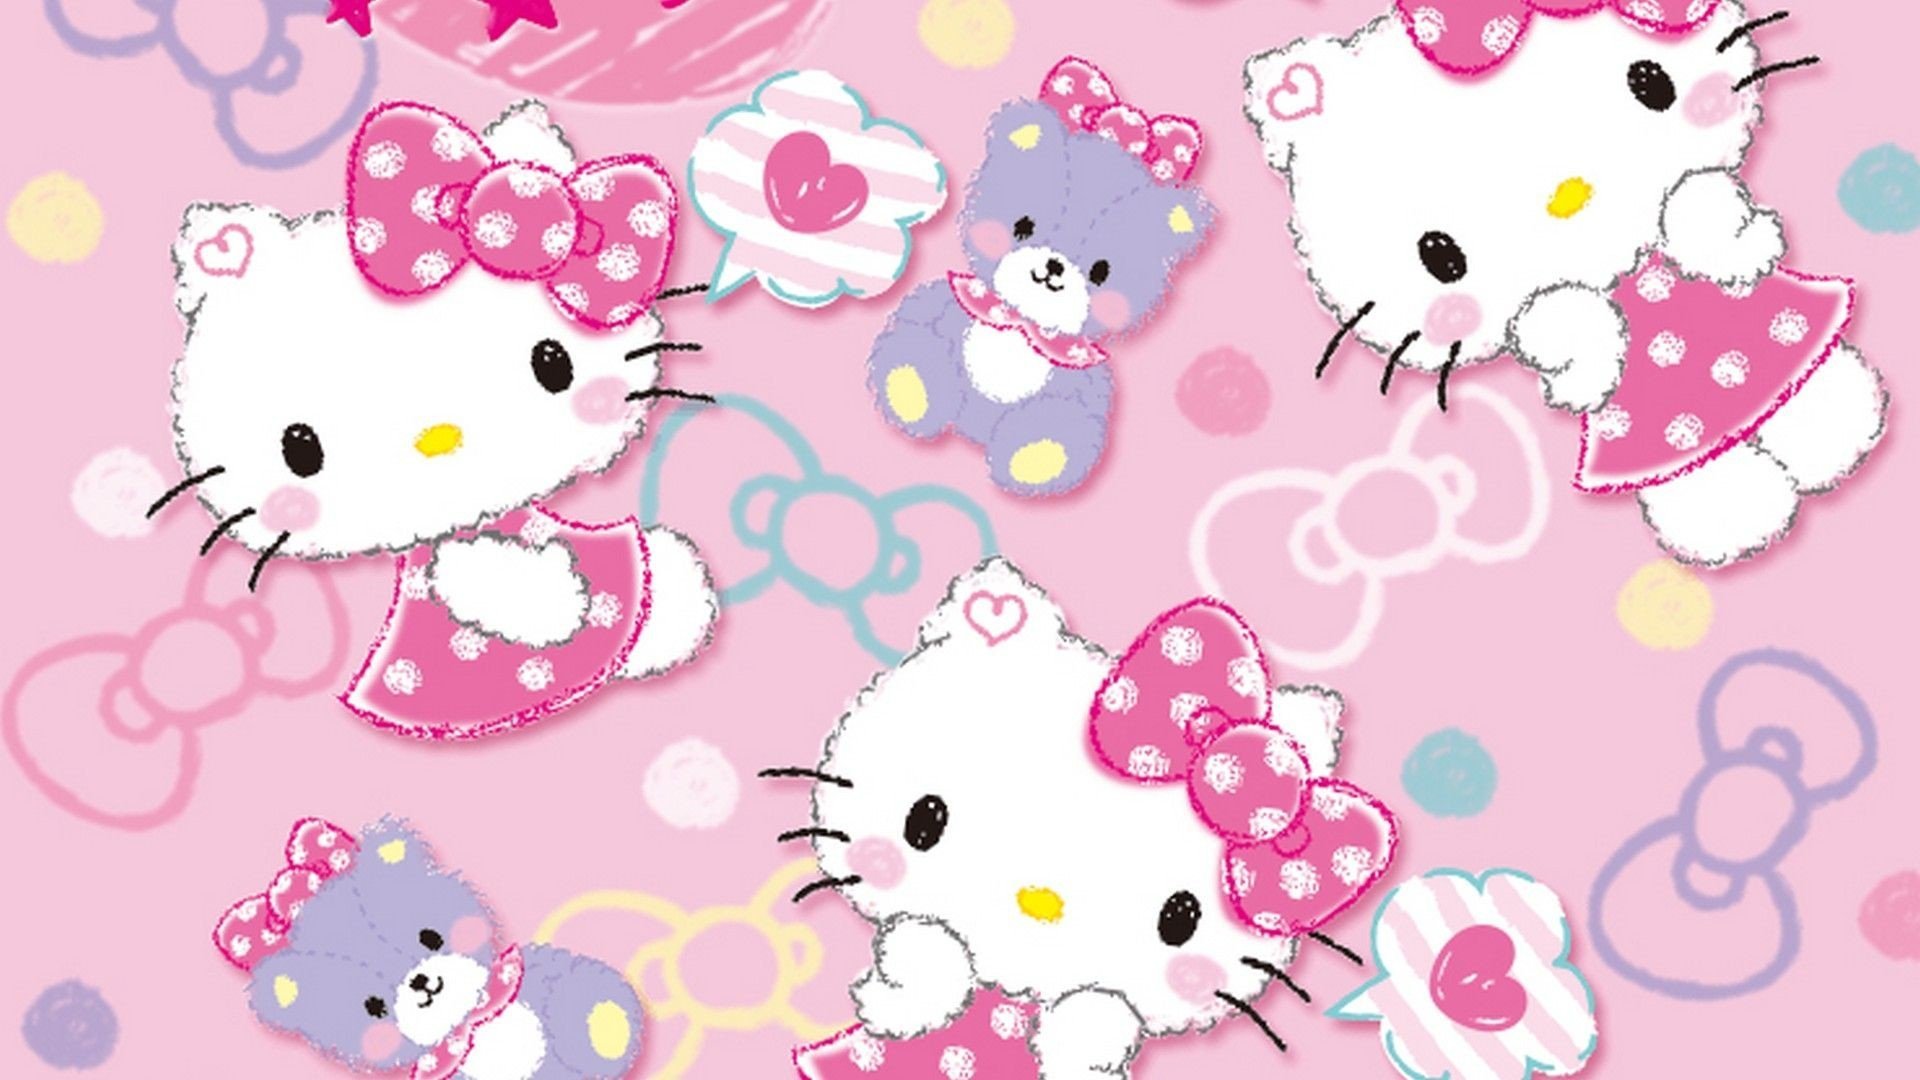 Free download Hello Kitty Background Wallpaper - [1920x1080] for your Desktop, Mobile & Tablet. Explore Wallpaper Of Kitty. Cute Hello Kitty Wallpaper, Hello Kitty Wallpaper, Hello Kitty Wallpaper For Computer